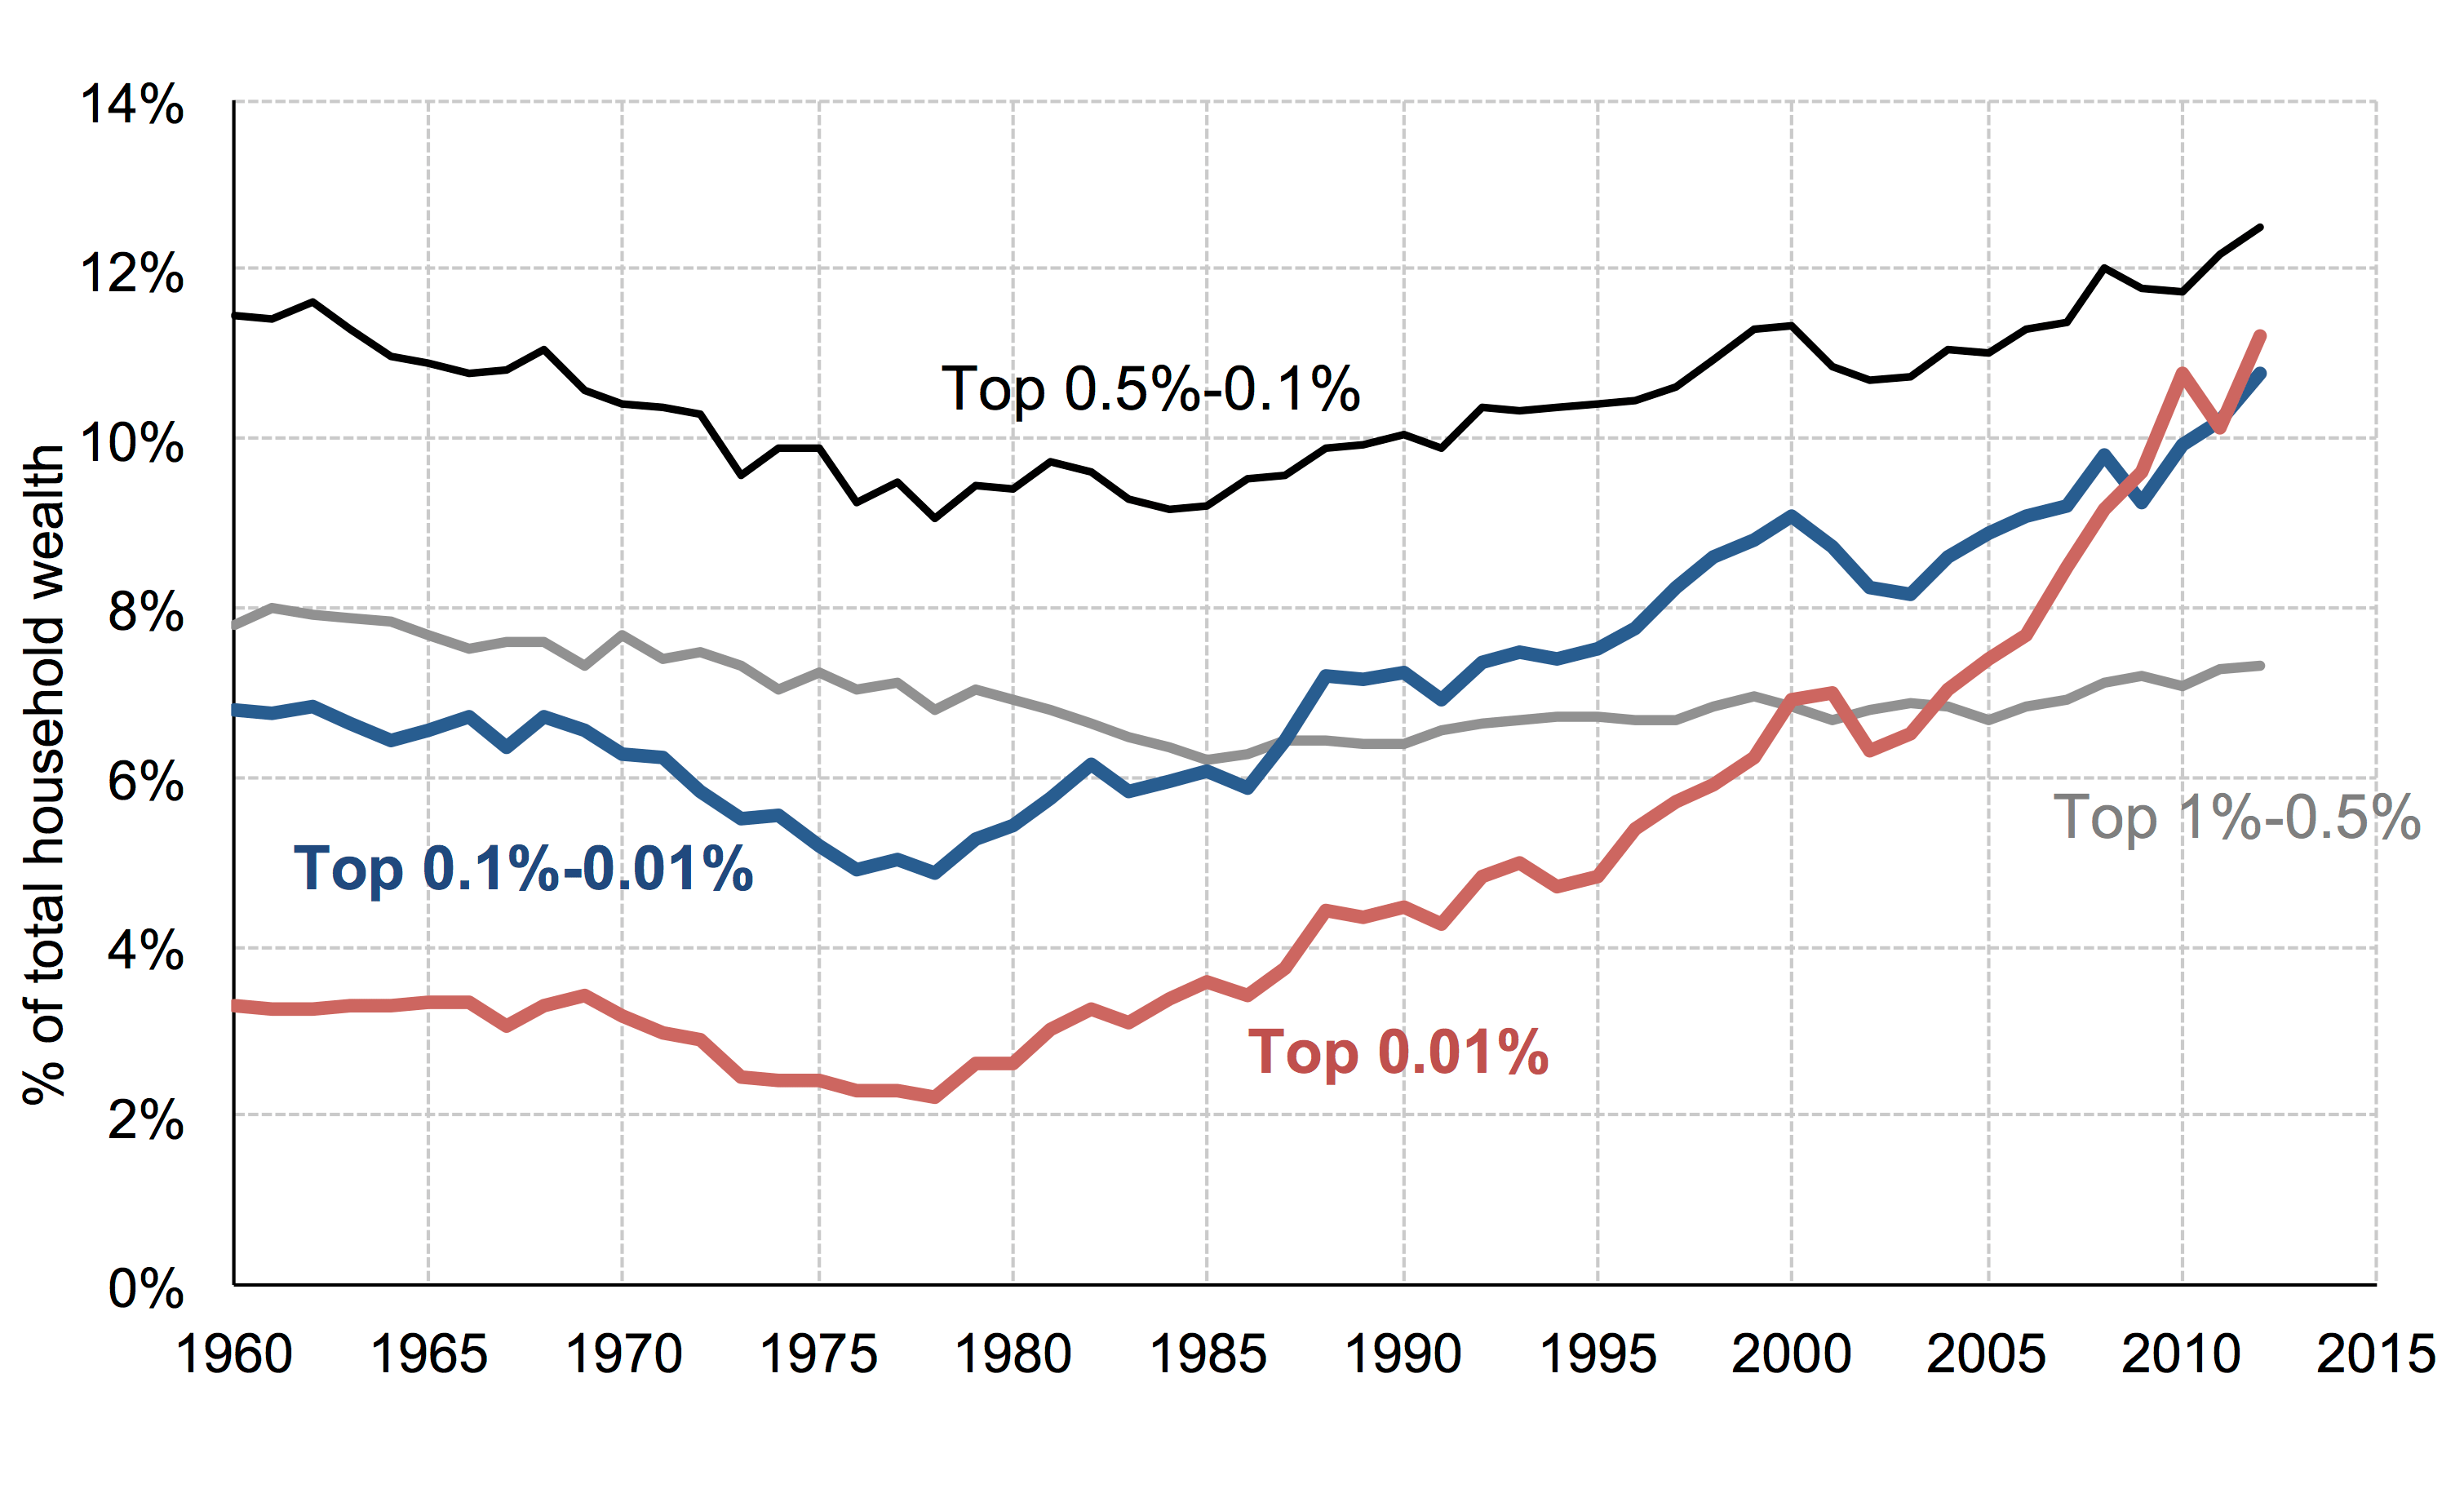 Share of wealth in the United States